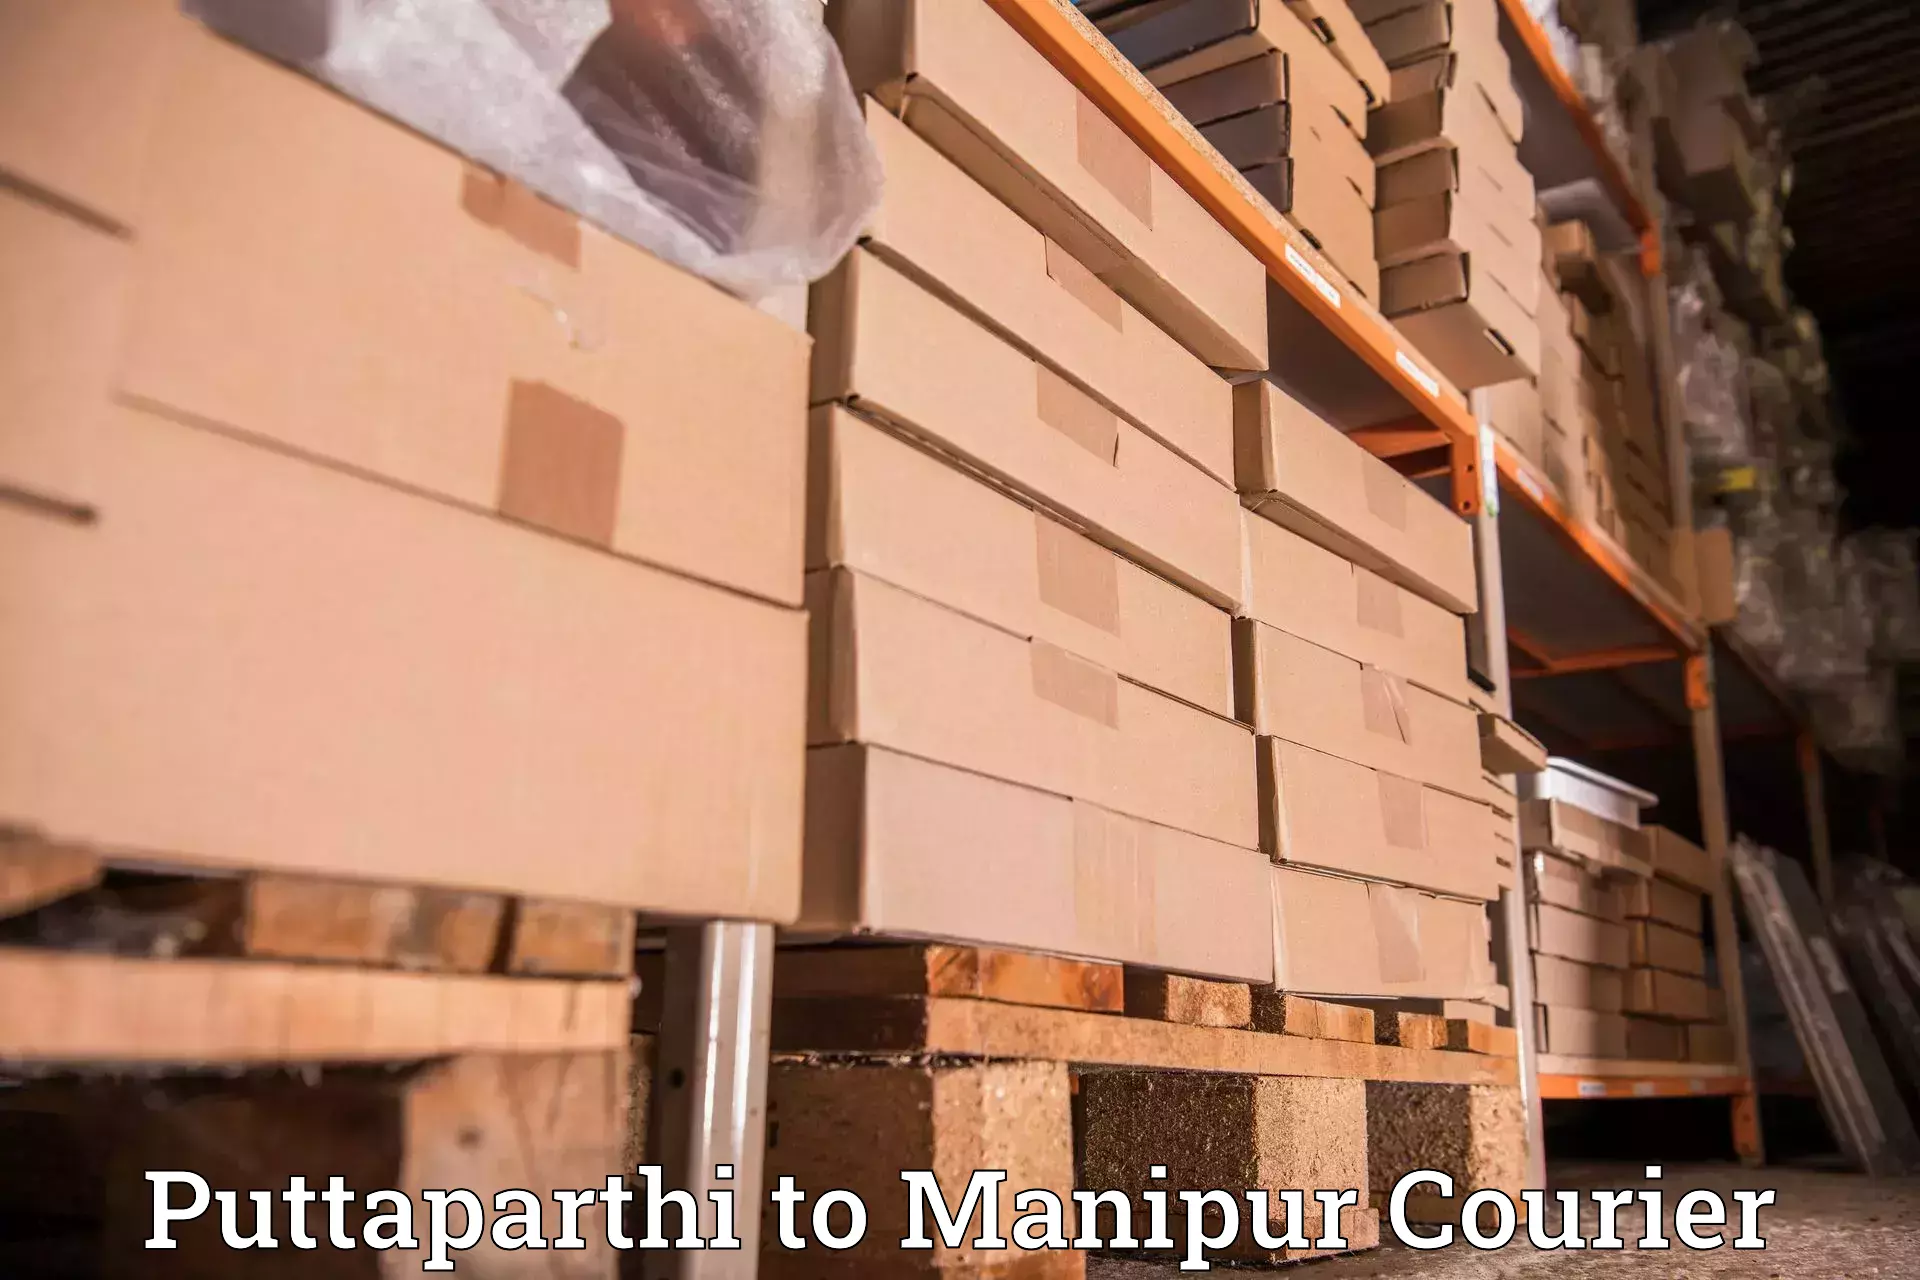 Delivery service partnership Puttaparthi to Imphal